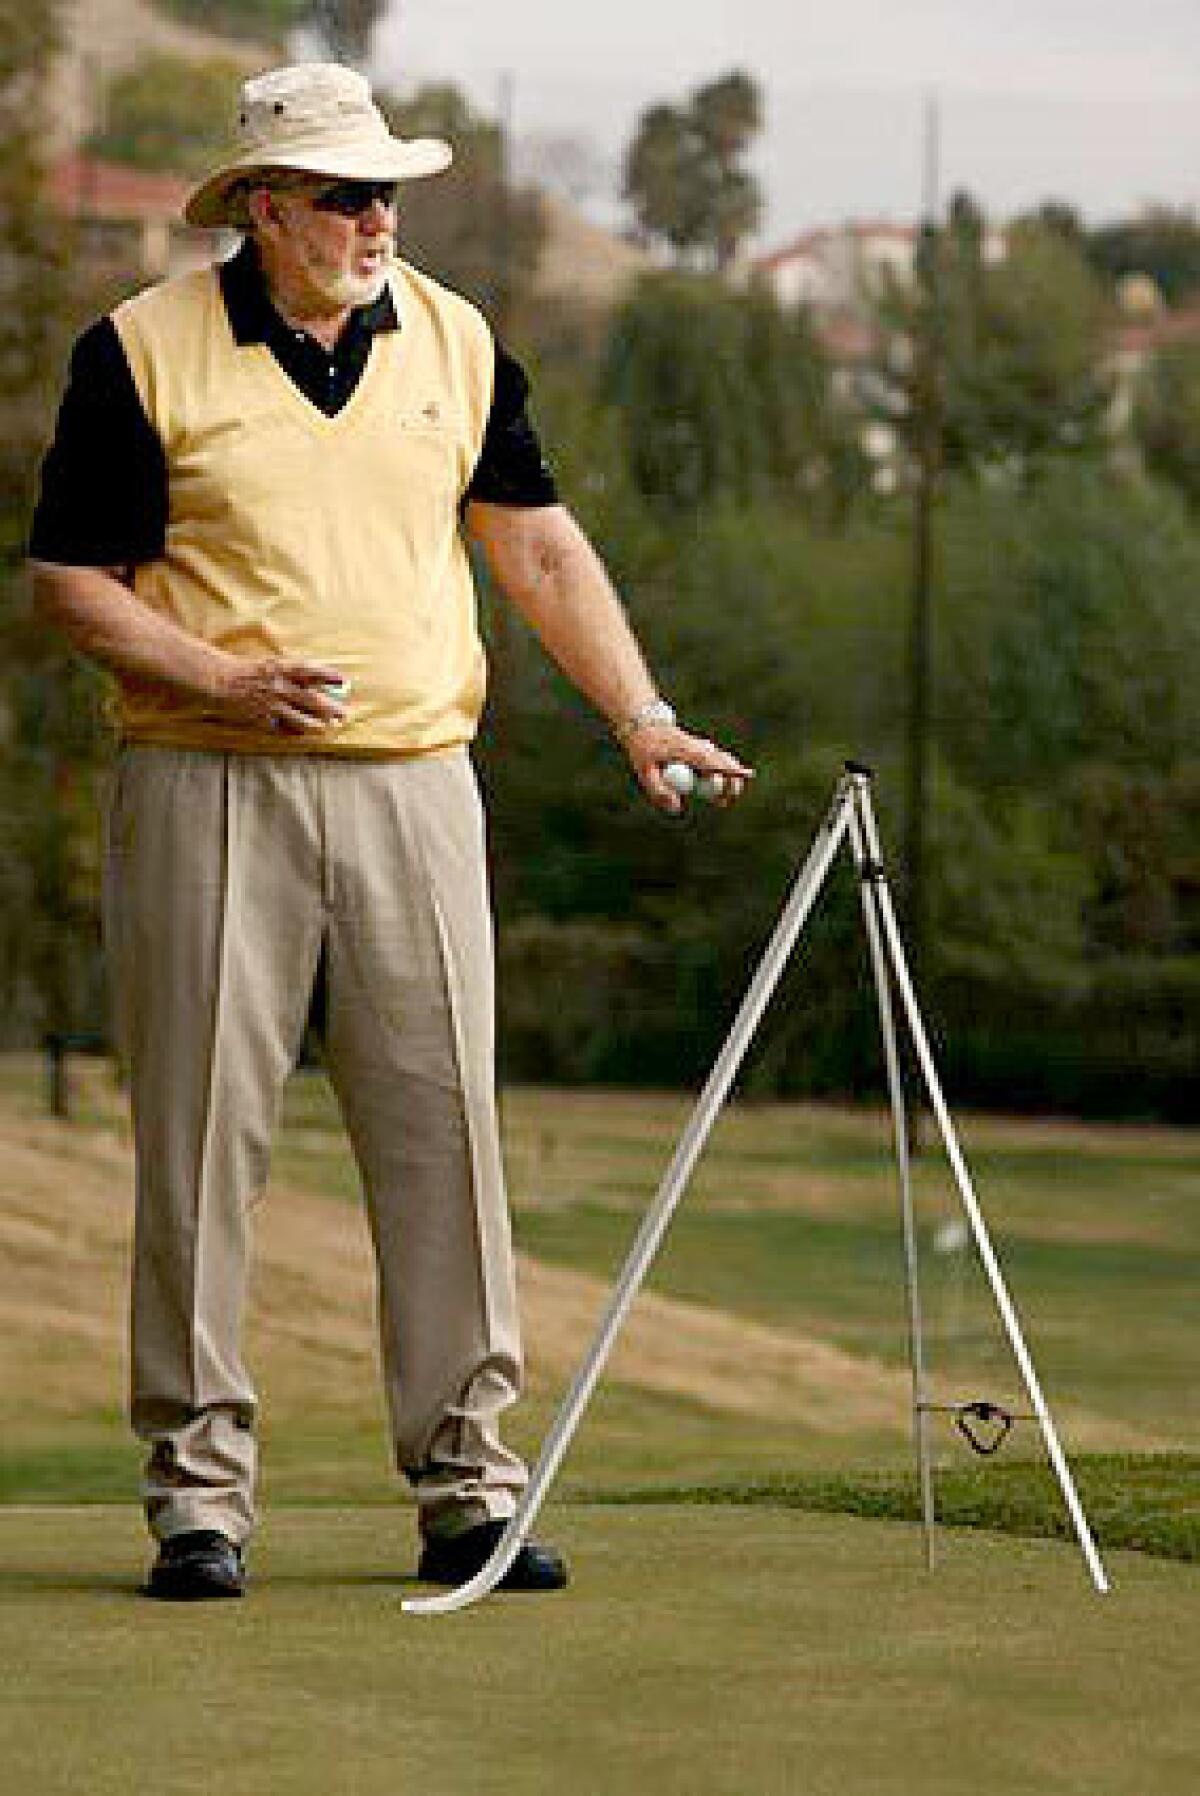 Guru to the pros Dave Pelz talks about this teaching tool called a "true roller" that he has used for 20 years when teaching putting. The noted golf instructor has counseled such players as Phil Mickelson on the short game of putting, chipping and getting out of sand traps.